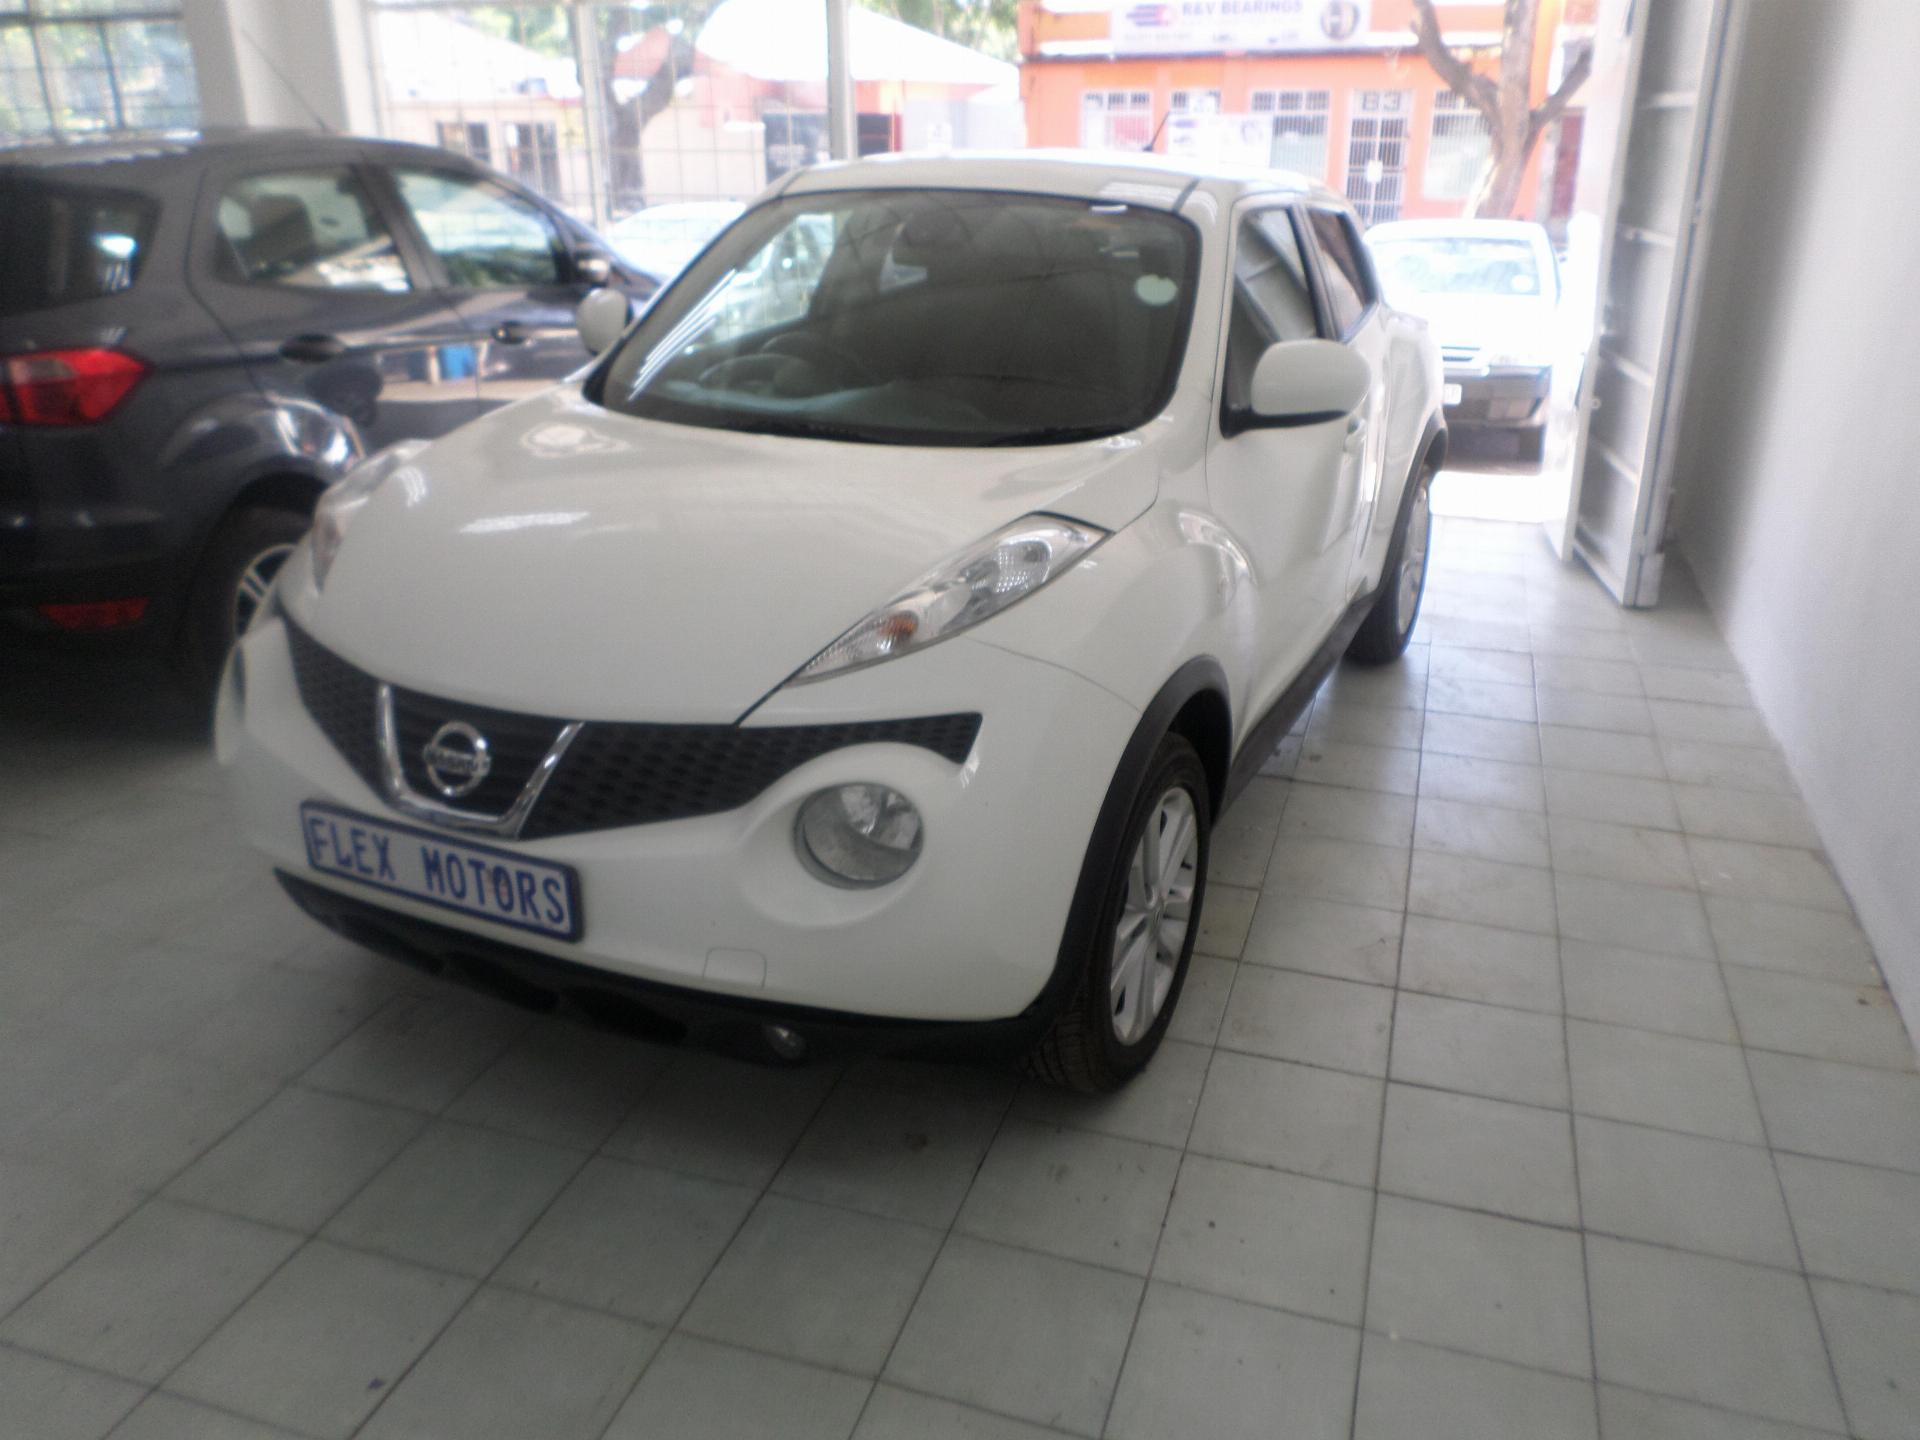 Nissan Juke V.W Polo 1.6 Car IS IN A Good Condition And TO GO